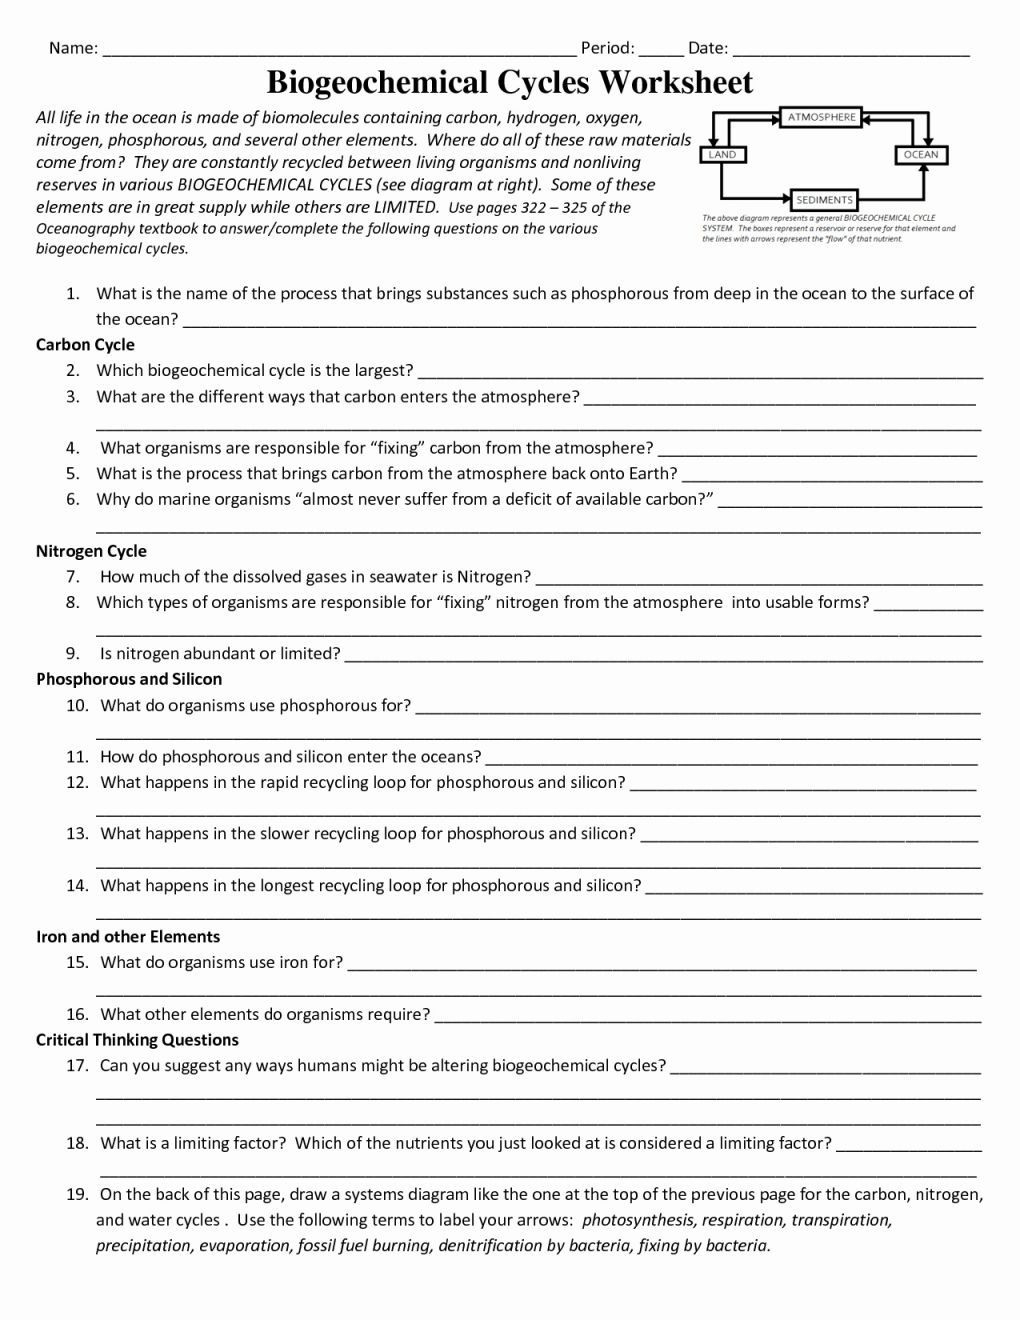 organic-molecules-worksheet-review-answers-db-excel